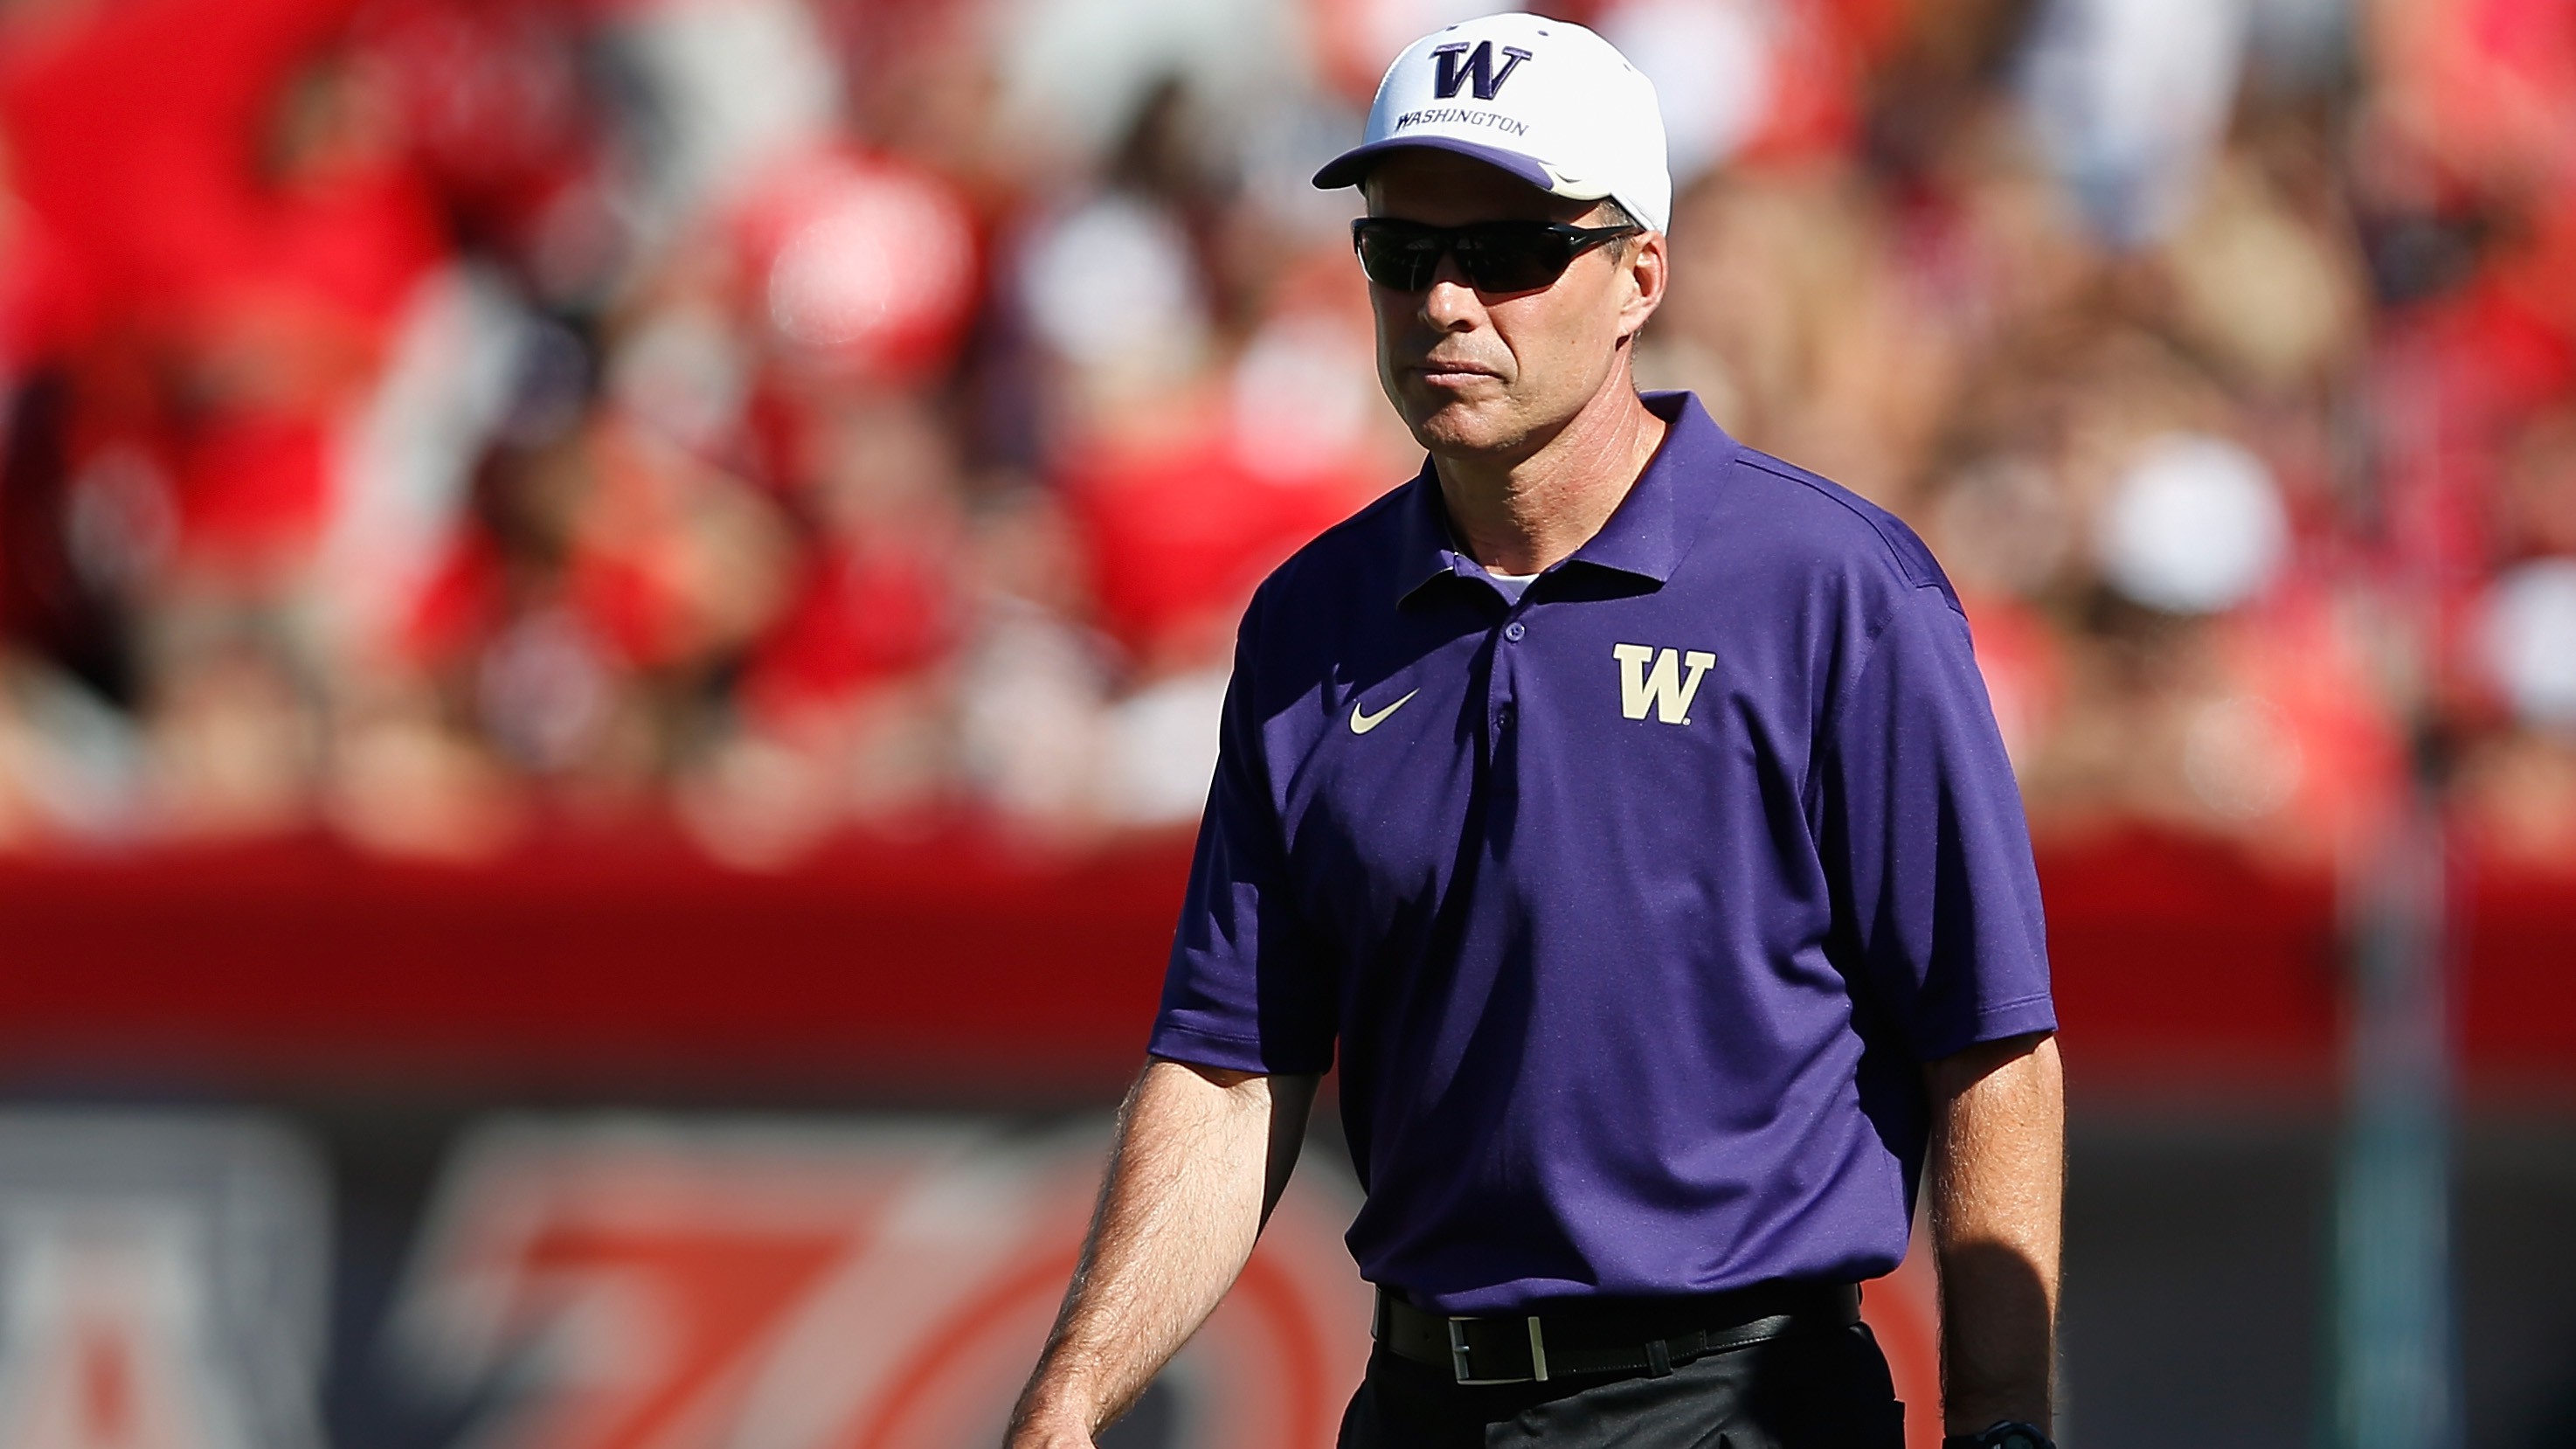 Washington vs. Boise State How to Watch Live Stream Online